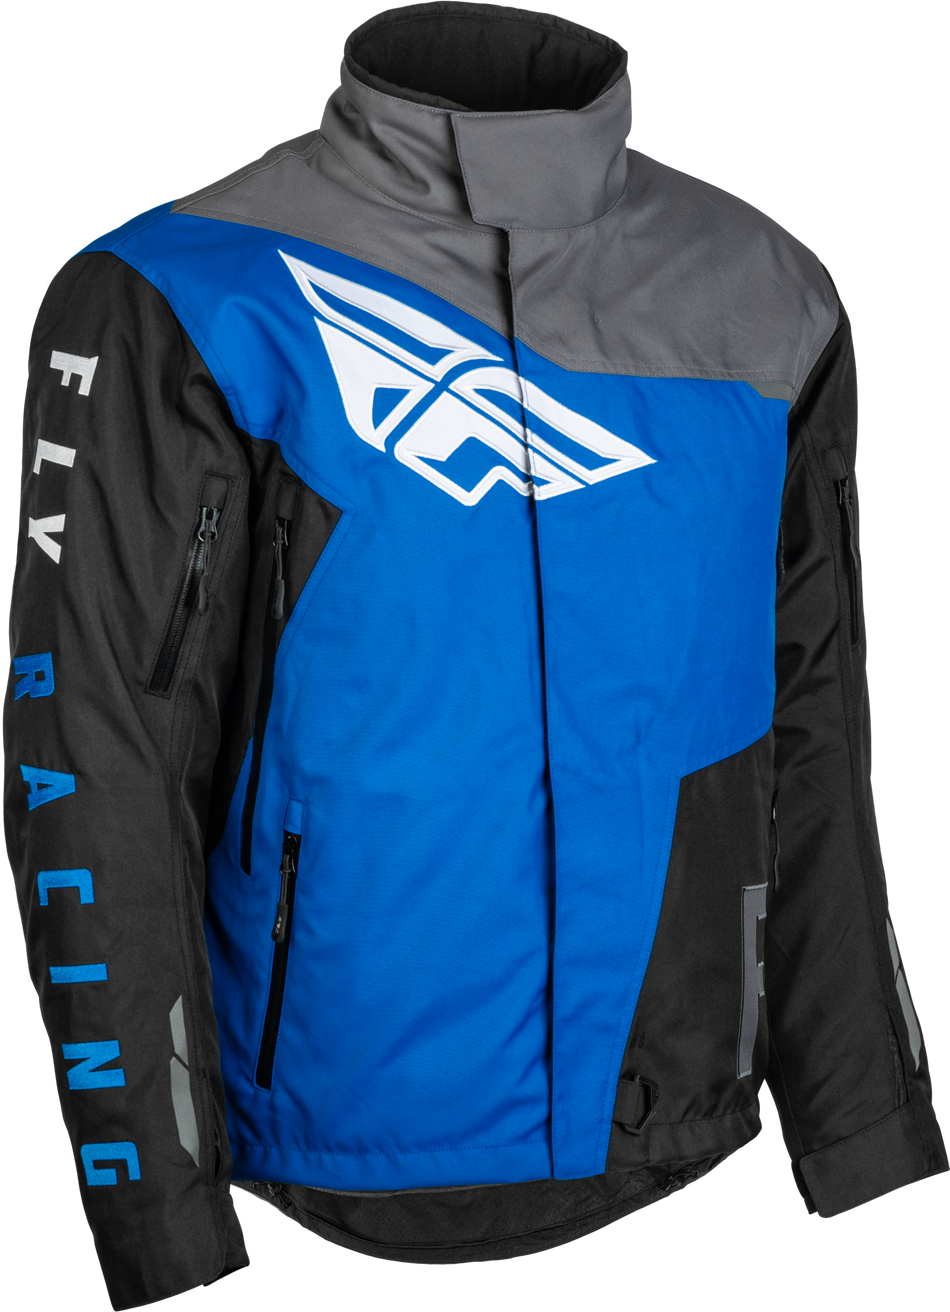 FLY RACING Youth Snx Pro Jacket Black/Grey/Blue Yl 470-4116YL